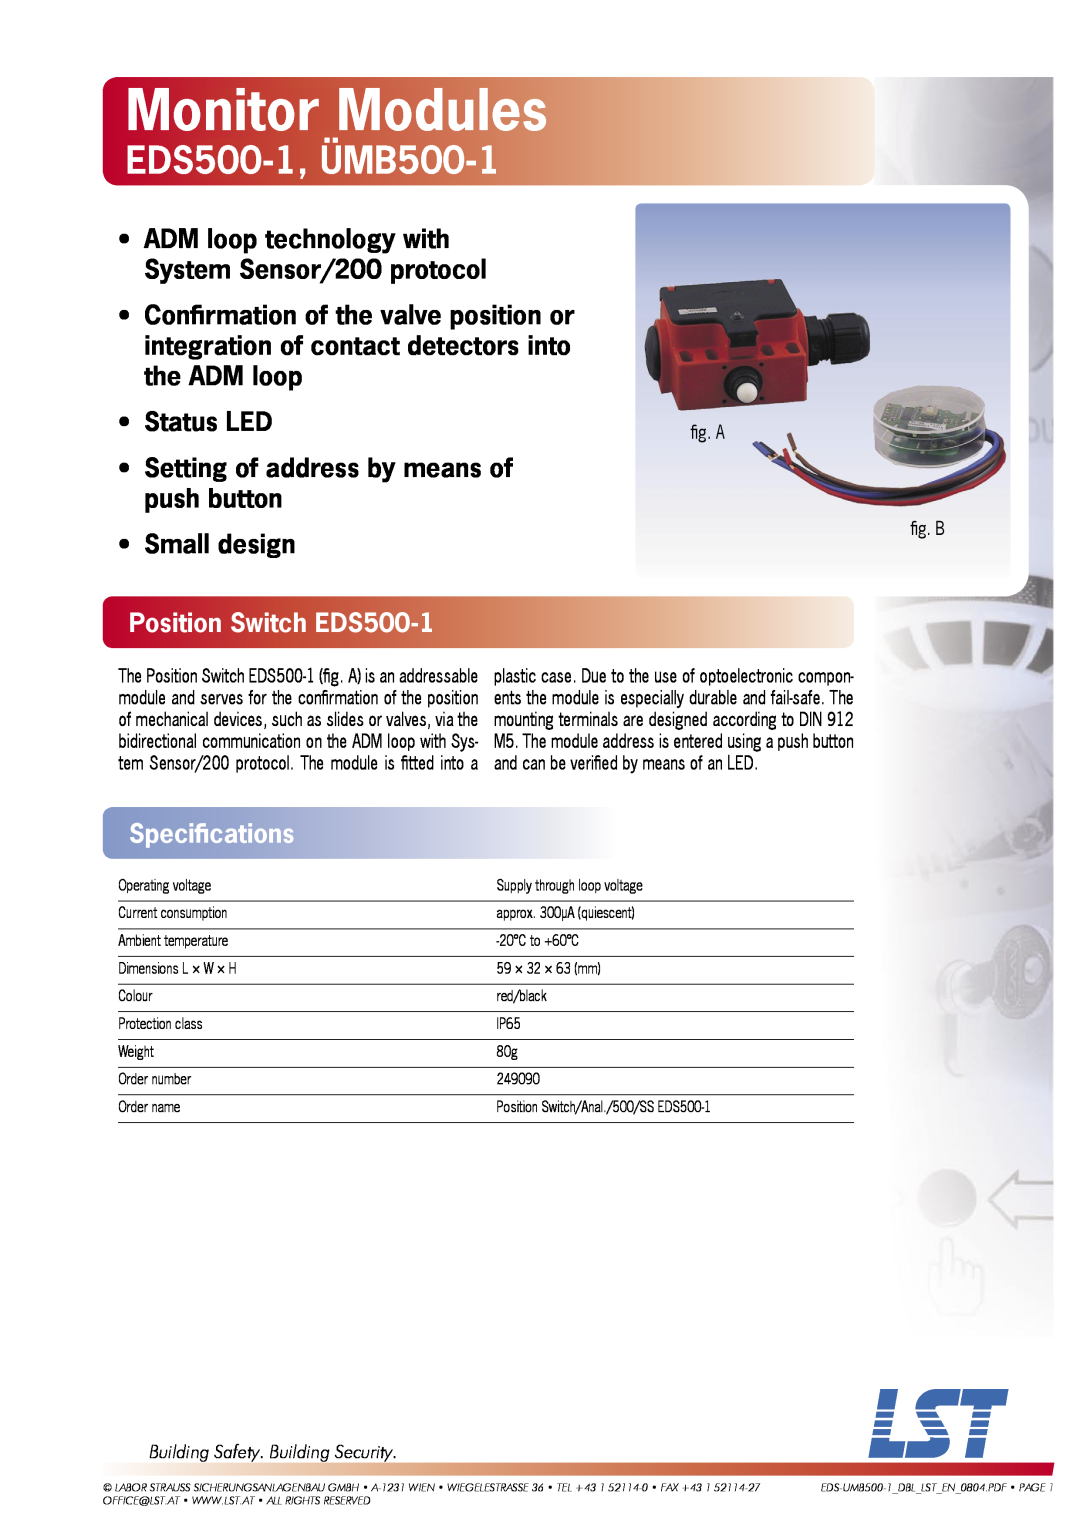 LST UMB500-1 specifications Position Switch EDS500-1, Speciﬁcations, Building Safety. Building Security, Monitor Modules 